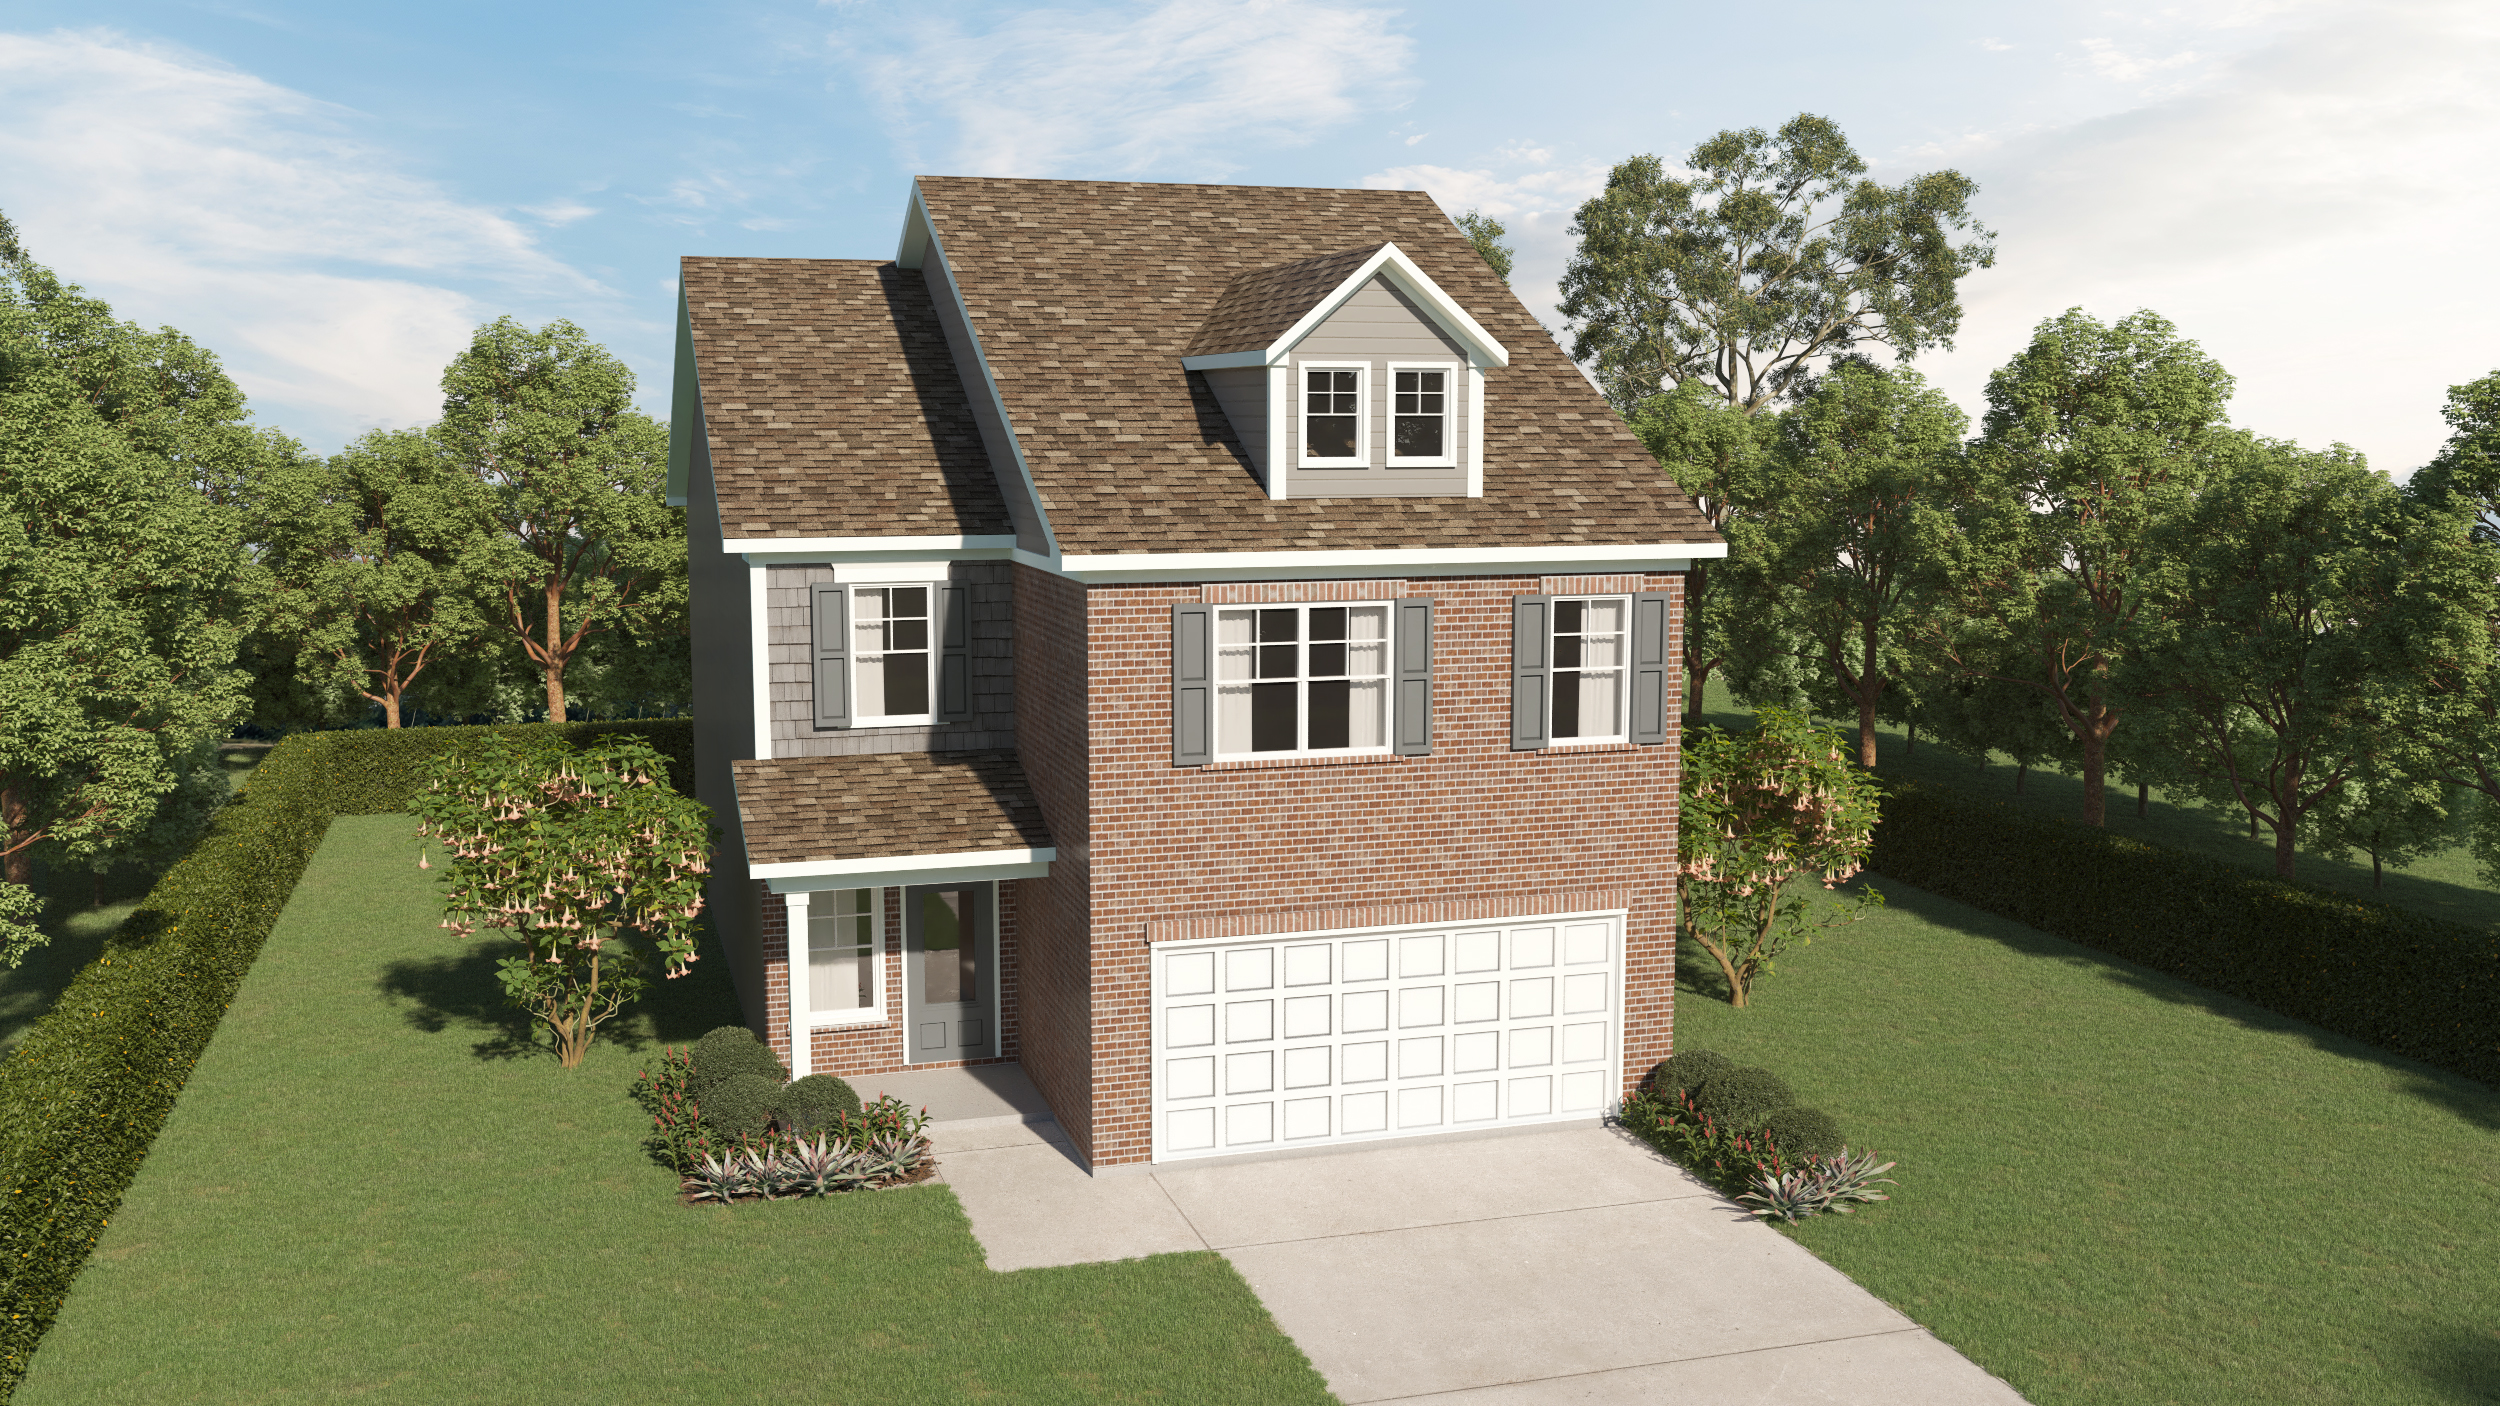 Franklin Plan at Fairview Lake in Conyers, GA